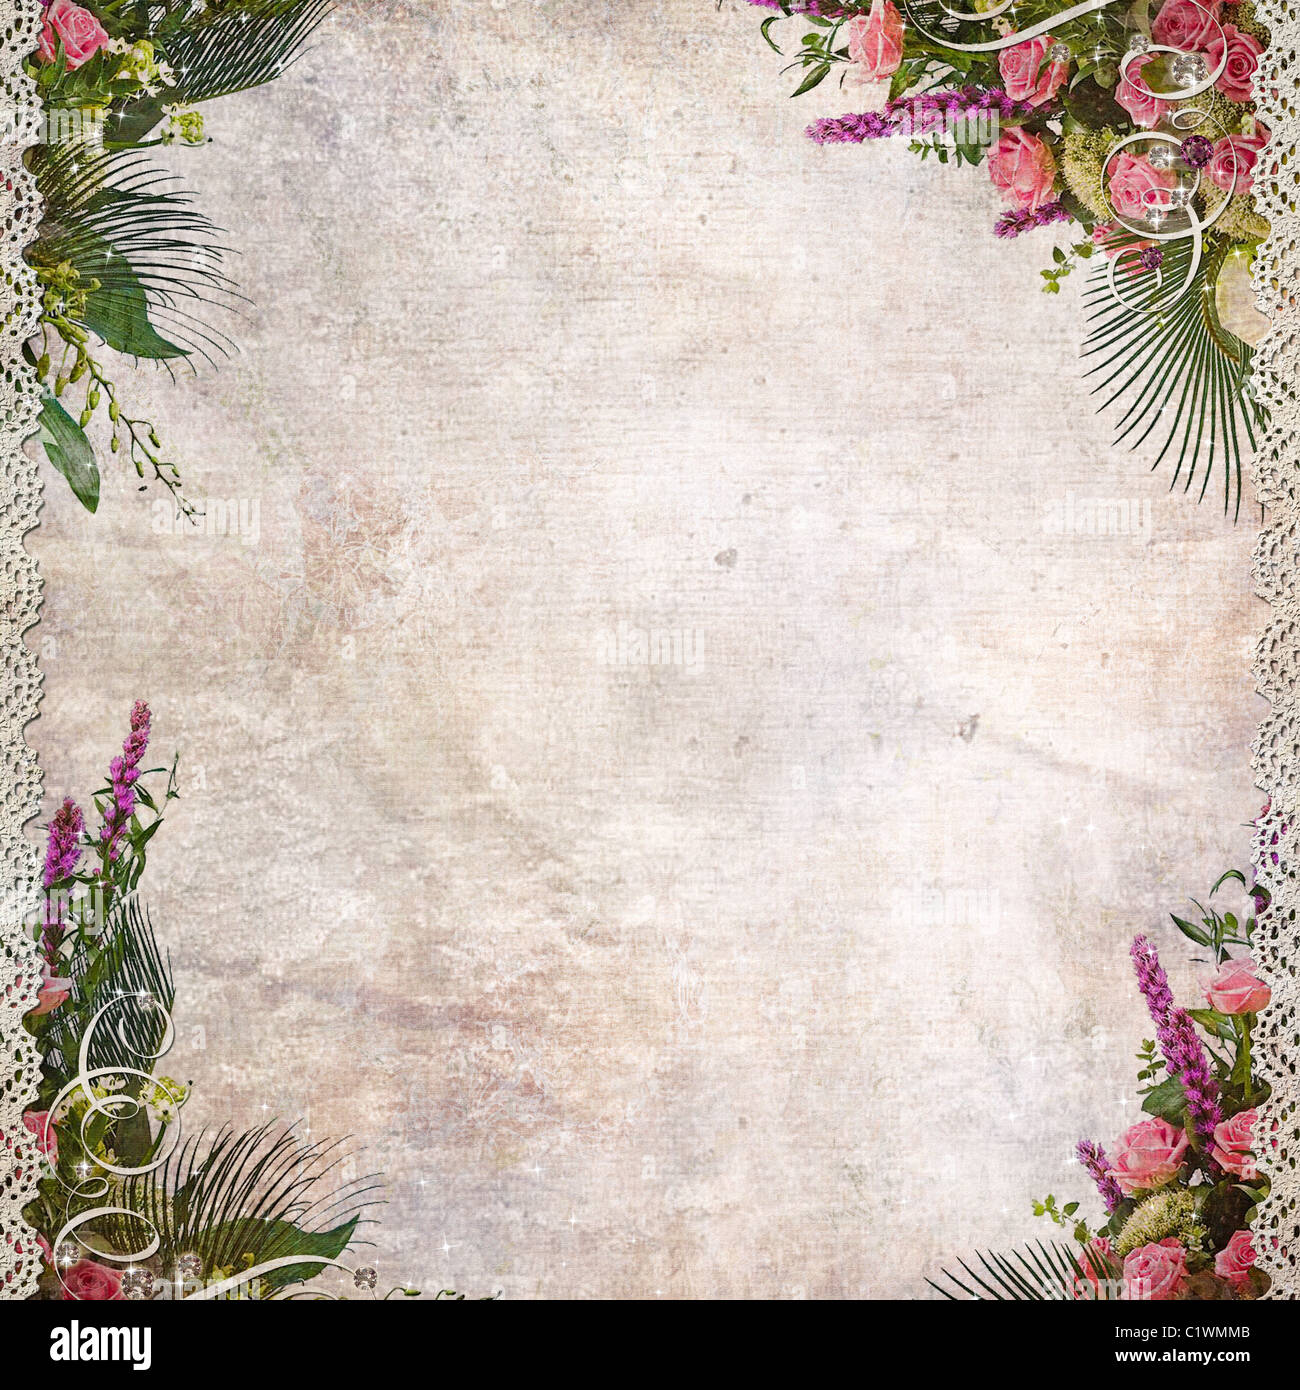 Create a Vintage Ambiance with Vintage Background Wedding Designs and Templates